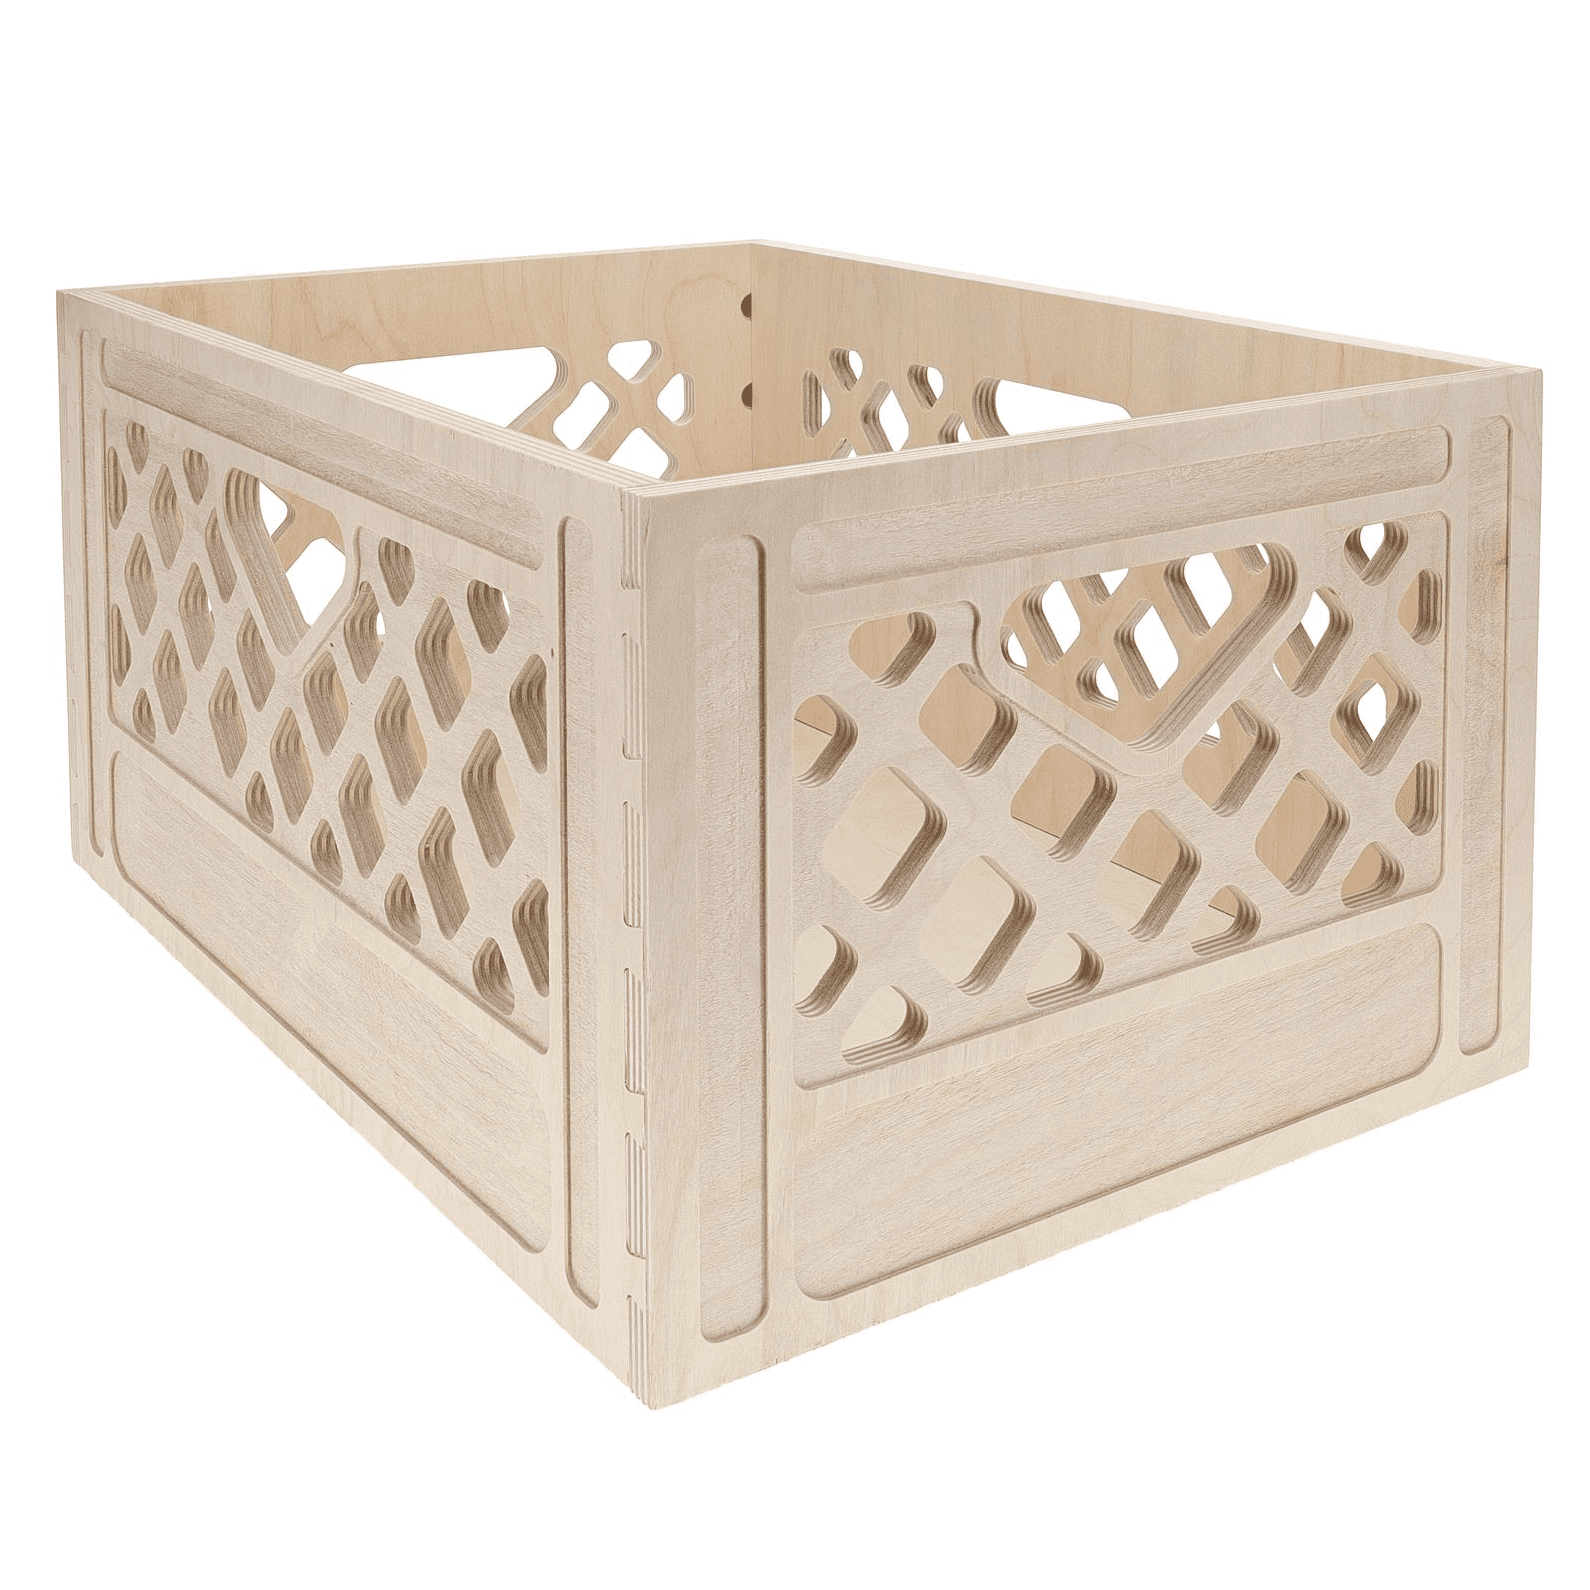  NUOBESTY 12 Pcs Boxes Handicraft Wooden Box Wooden Crate  Unpainted Nesting Crates Wood Crates for Display Wood Crates Unfinished  Home Decor Unfinished Wood Crate Accessories Box Jewelry : Office Products